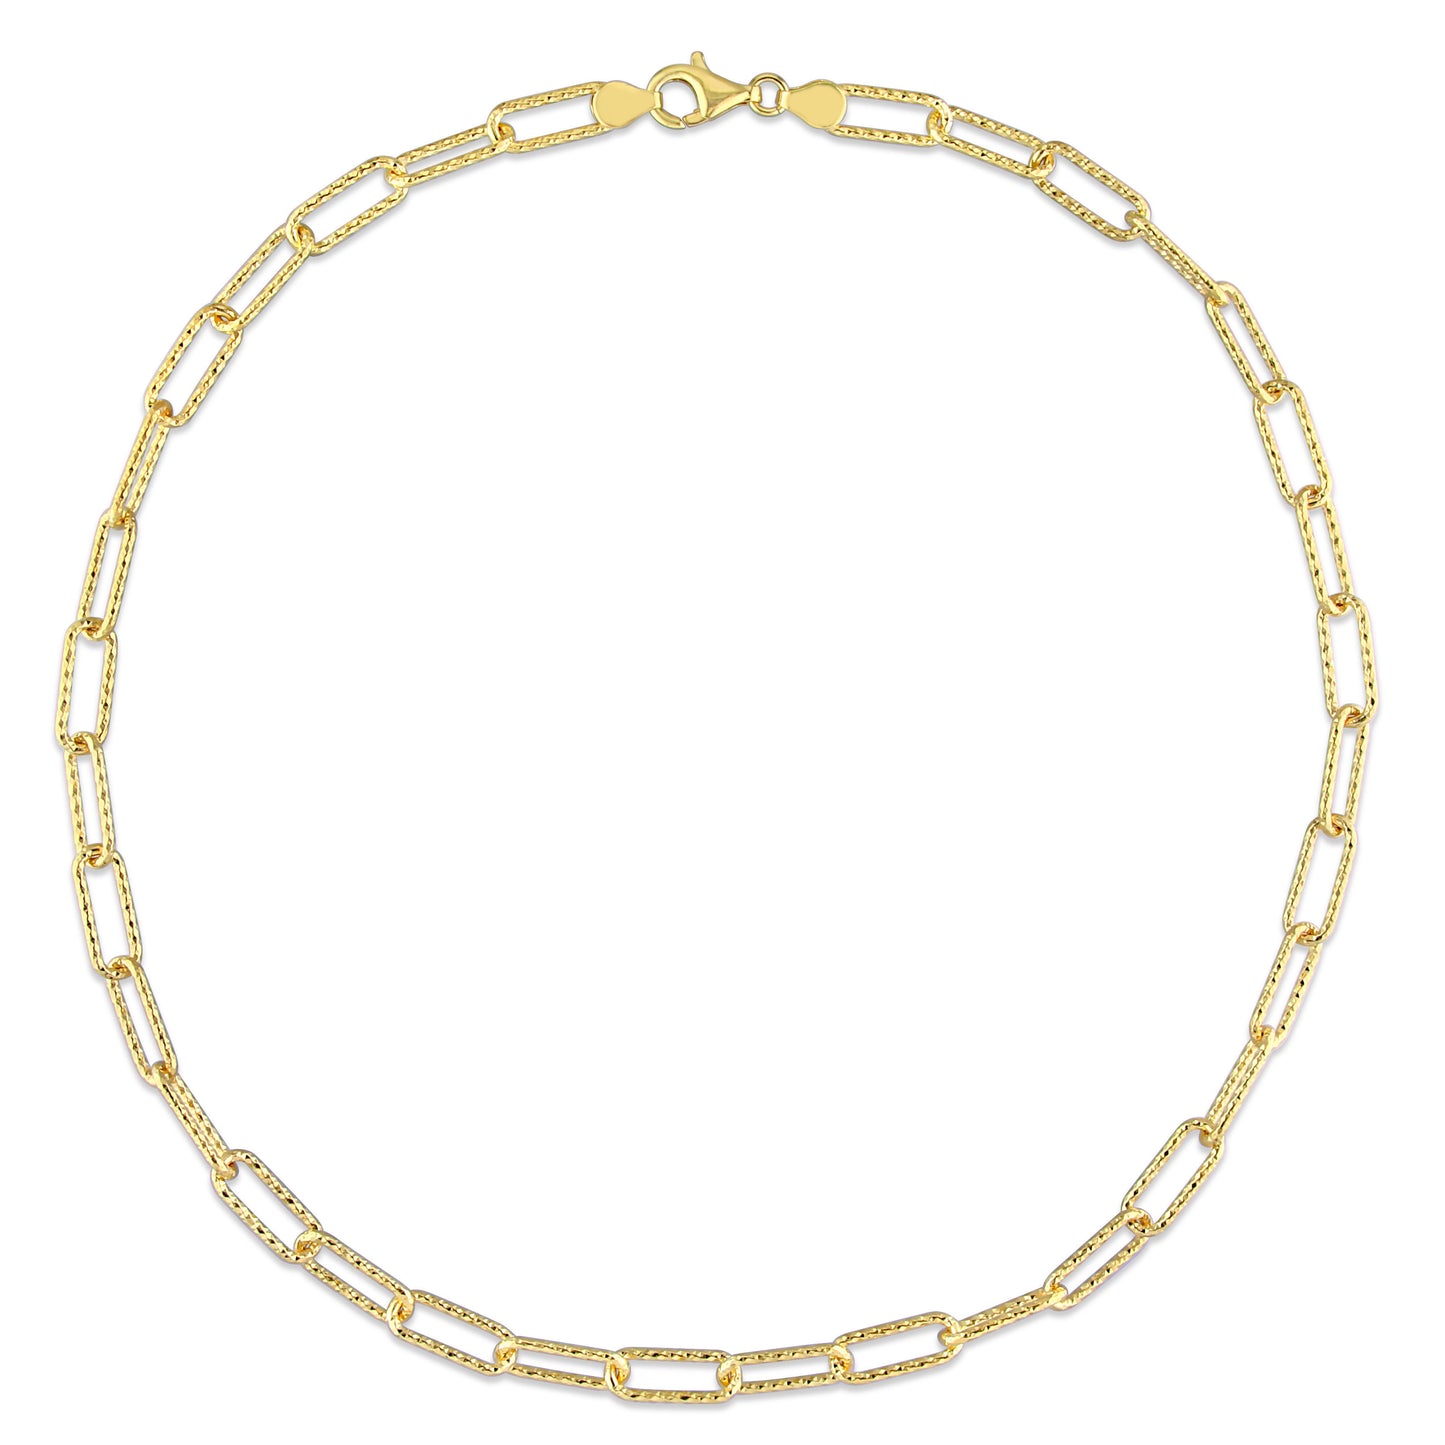 18k Yellow Gold Plated Textured Paperclip Chain in 6mm